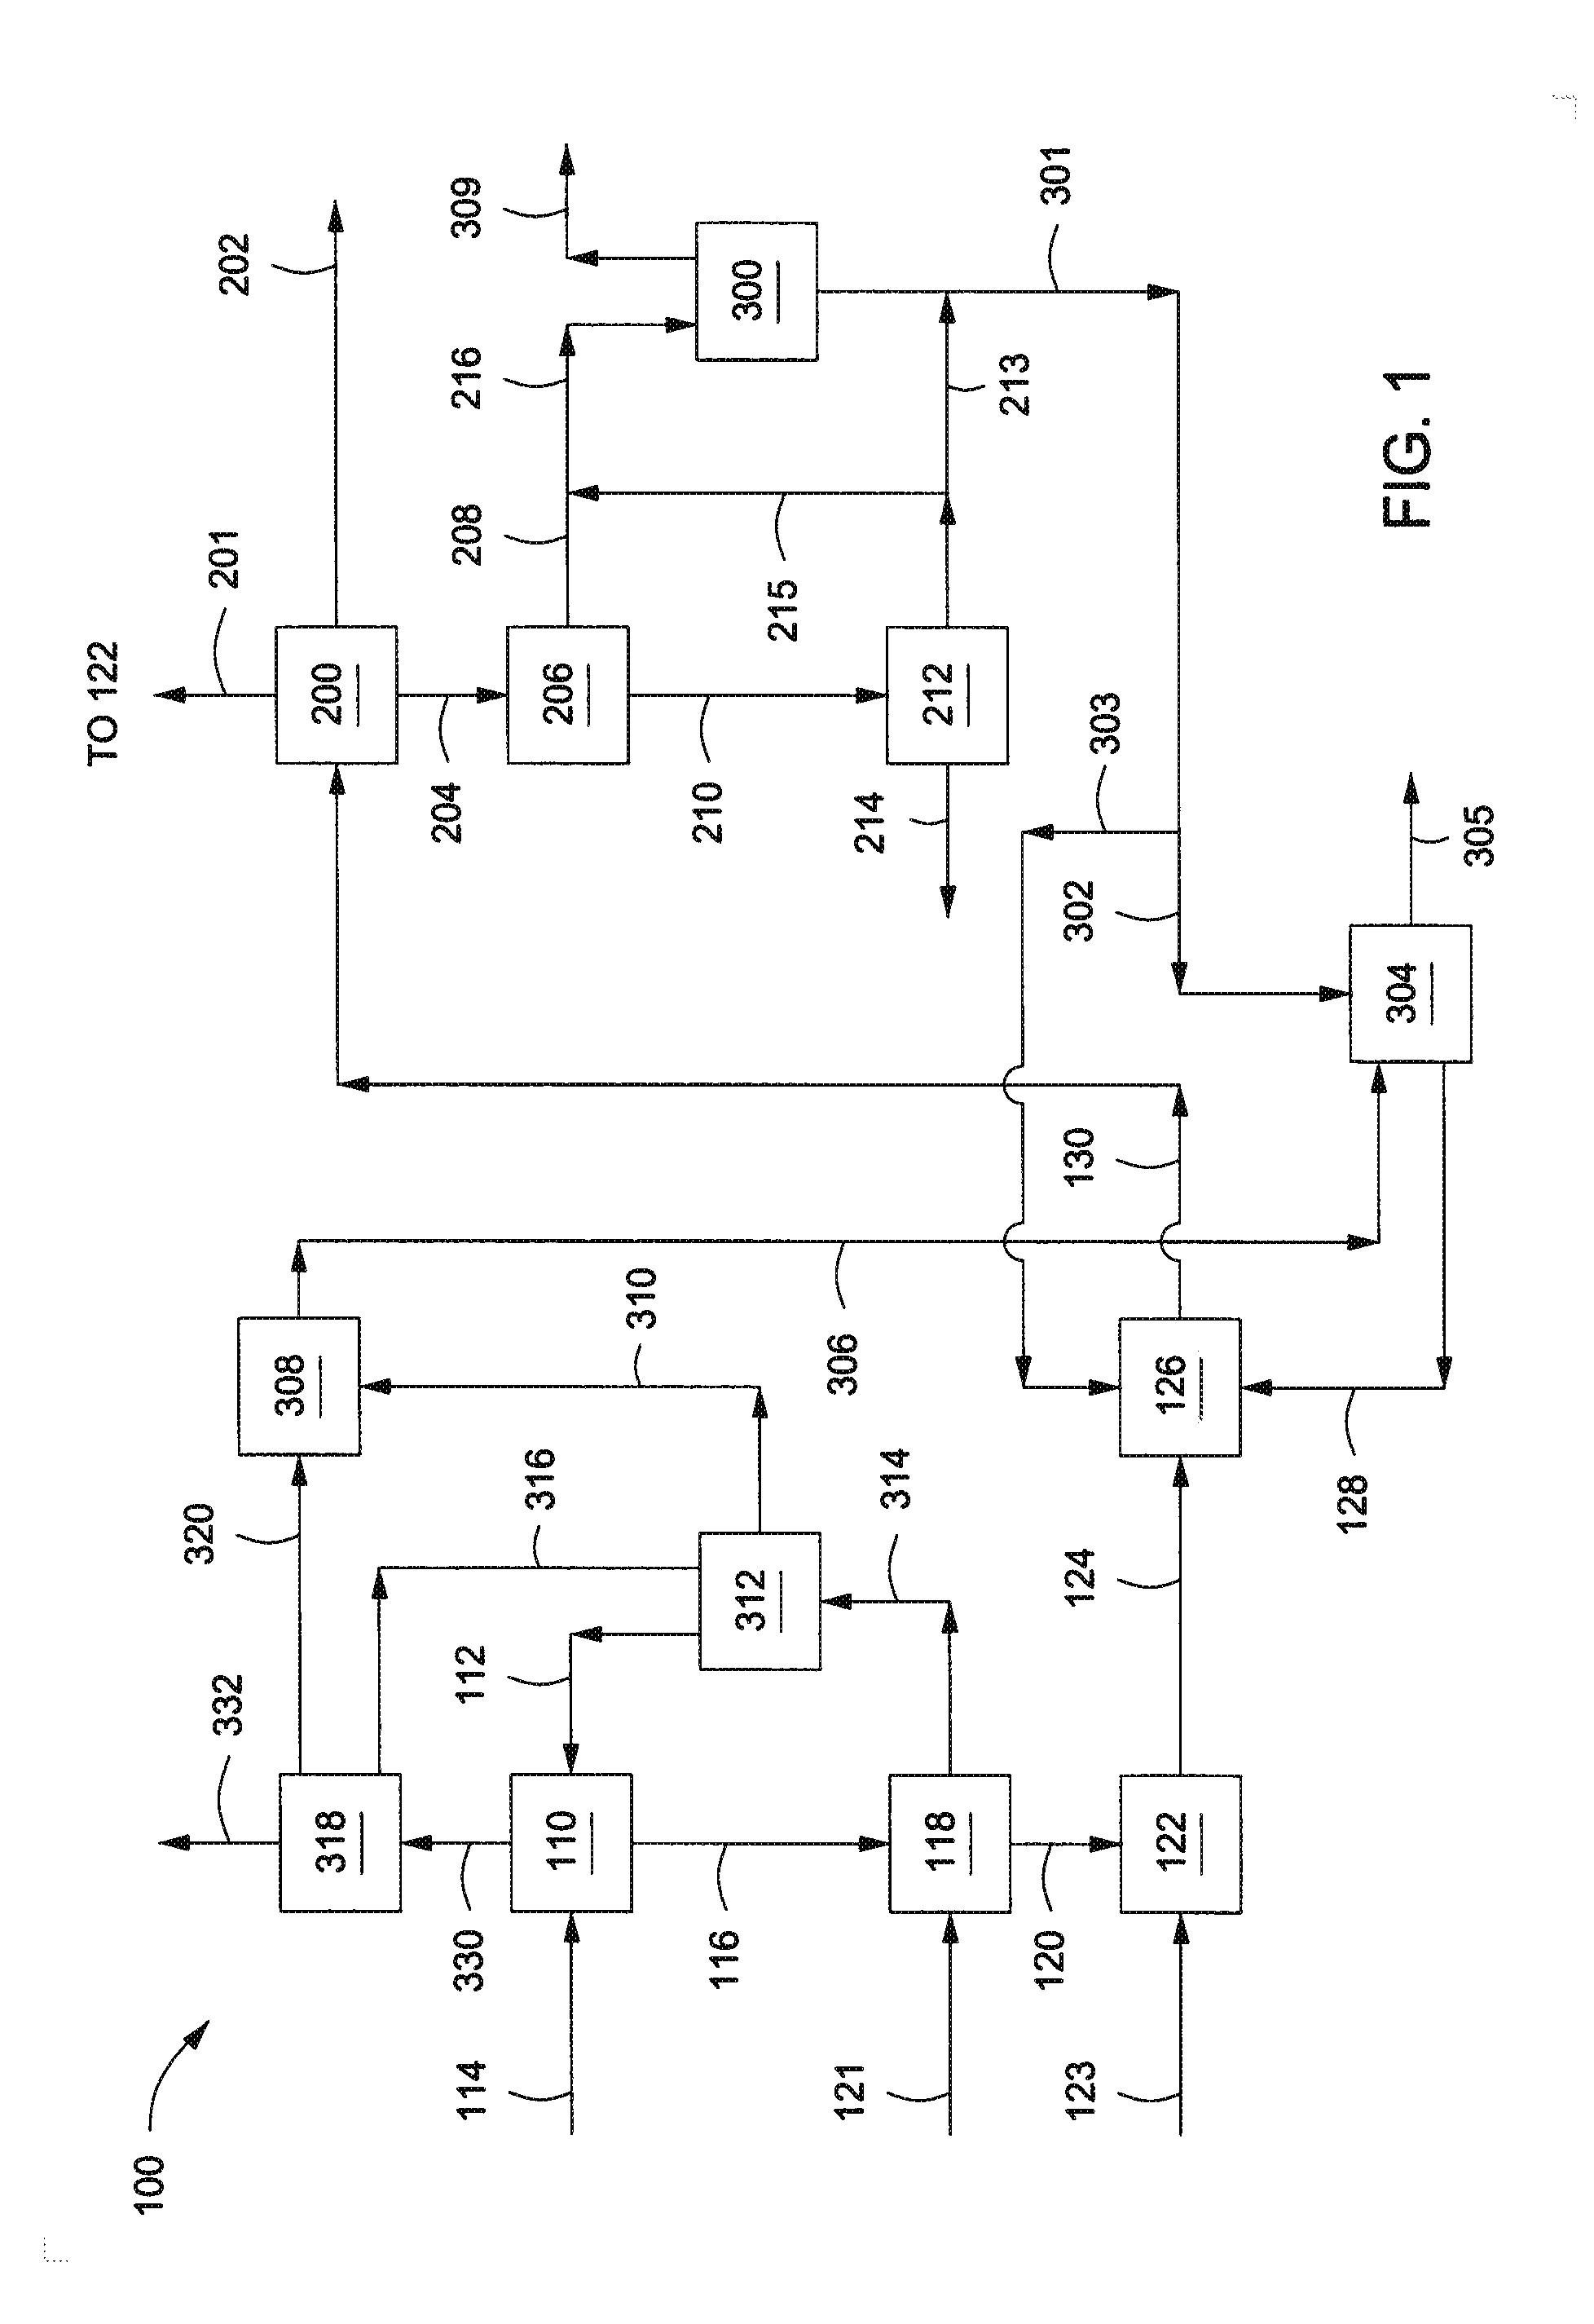 Methods and systems for co-producing a low-methanol content acetone